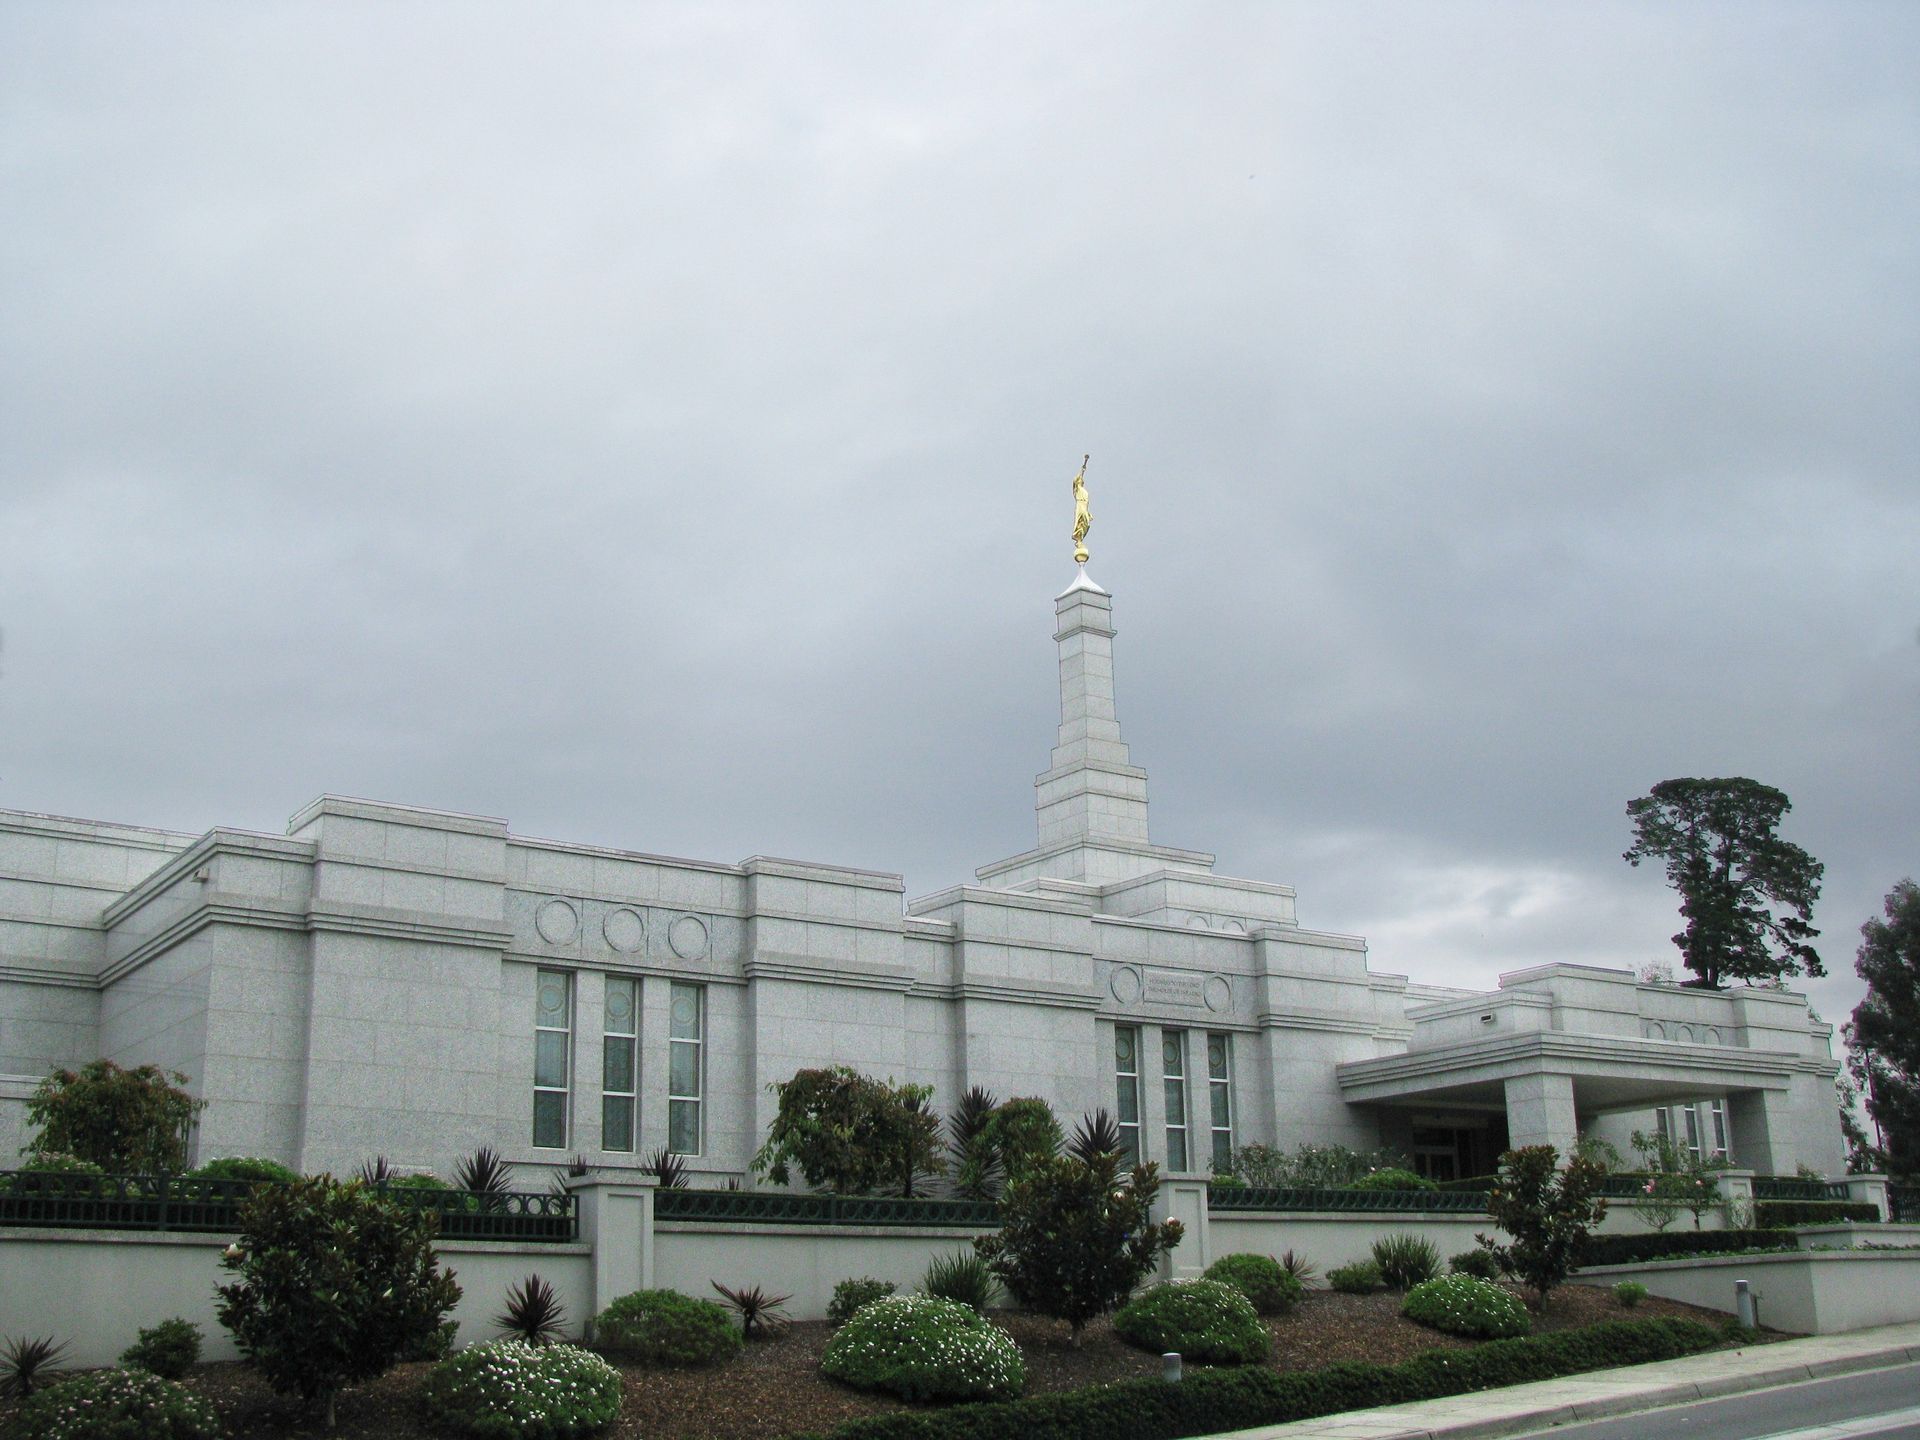 The Melbourne Australia Temple on a cloudy day.